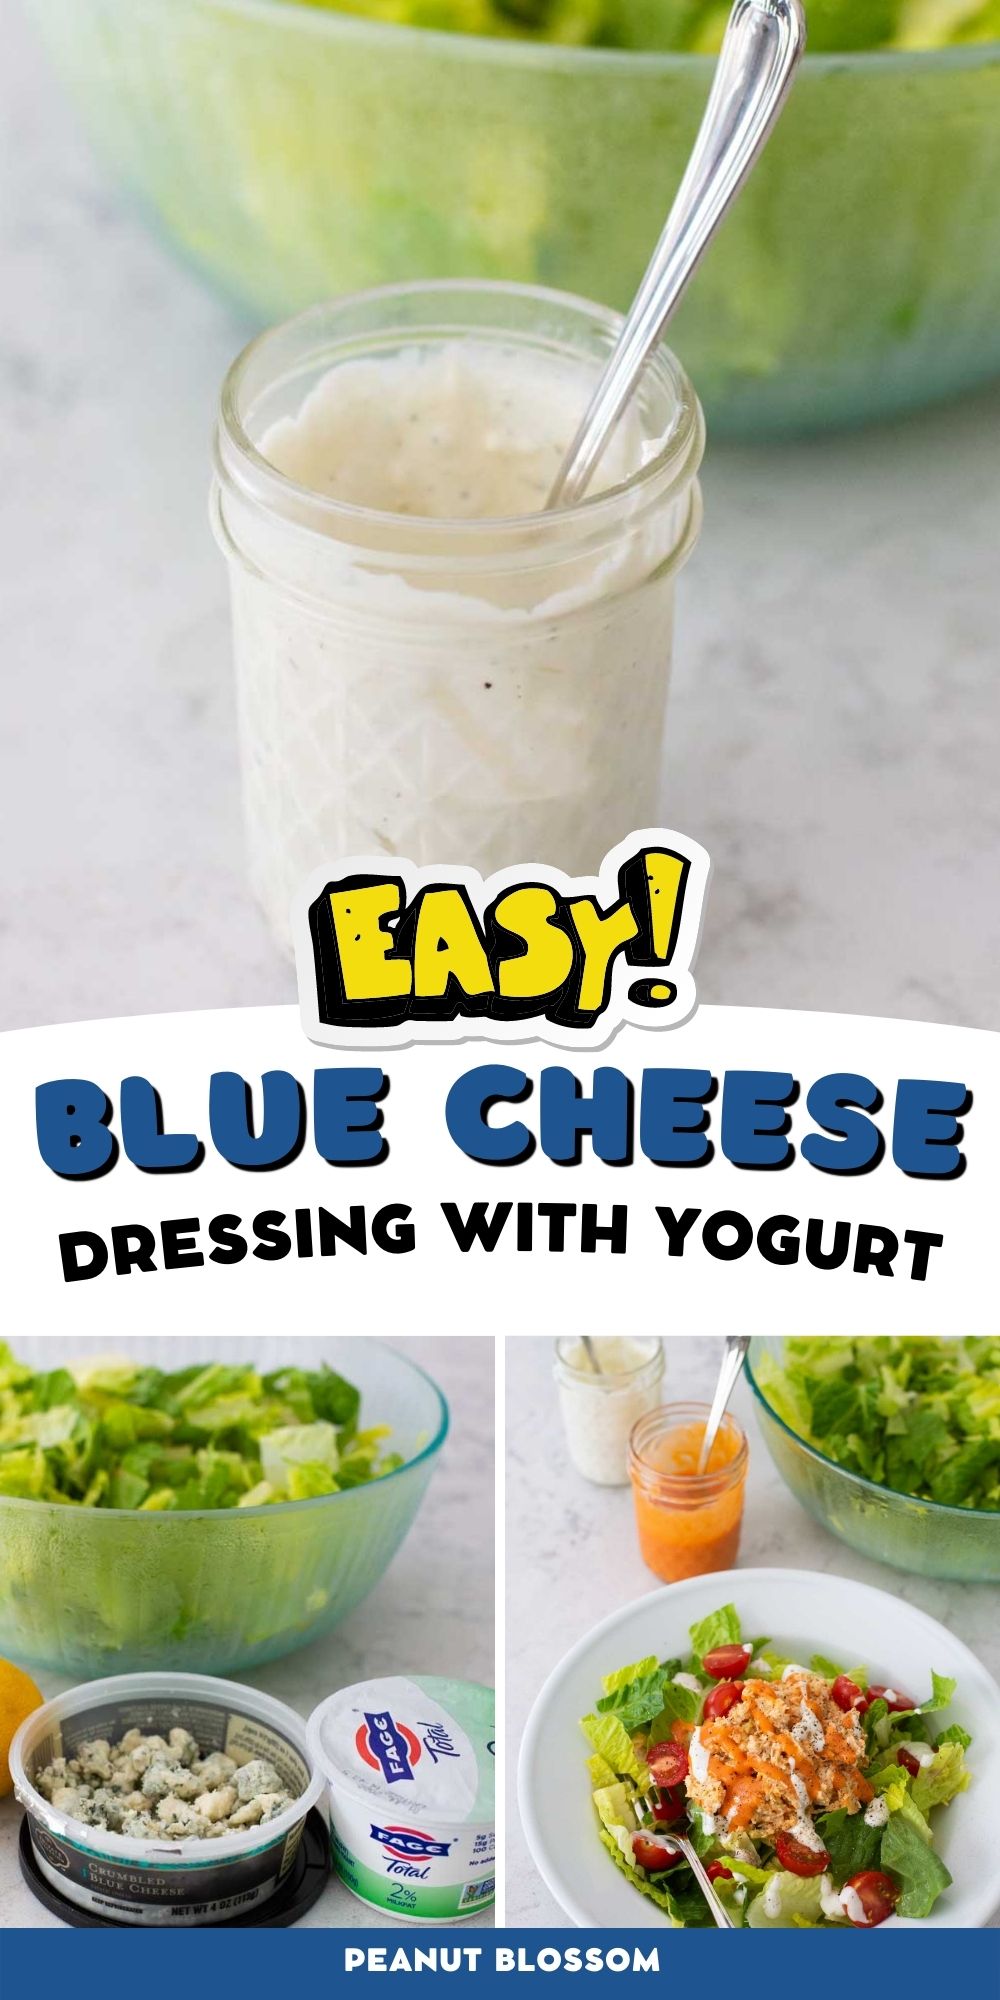 A photo collage shows the ingredients and final jar of blue cheese dressing.